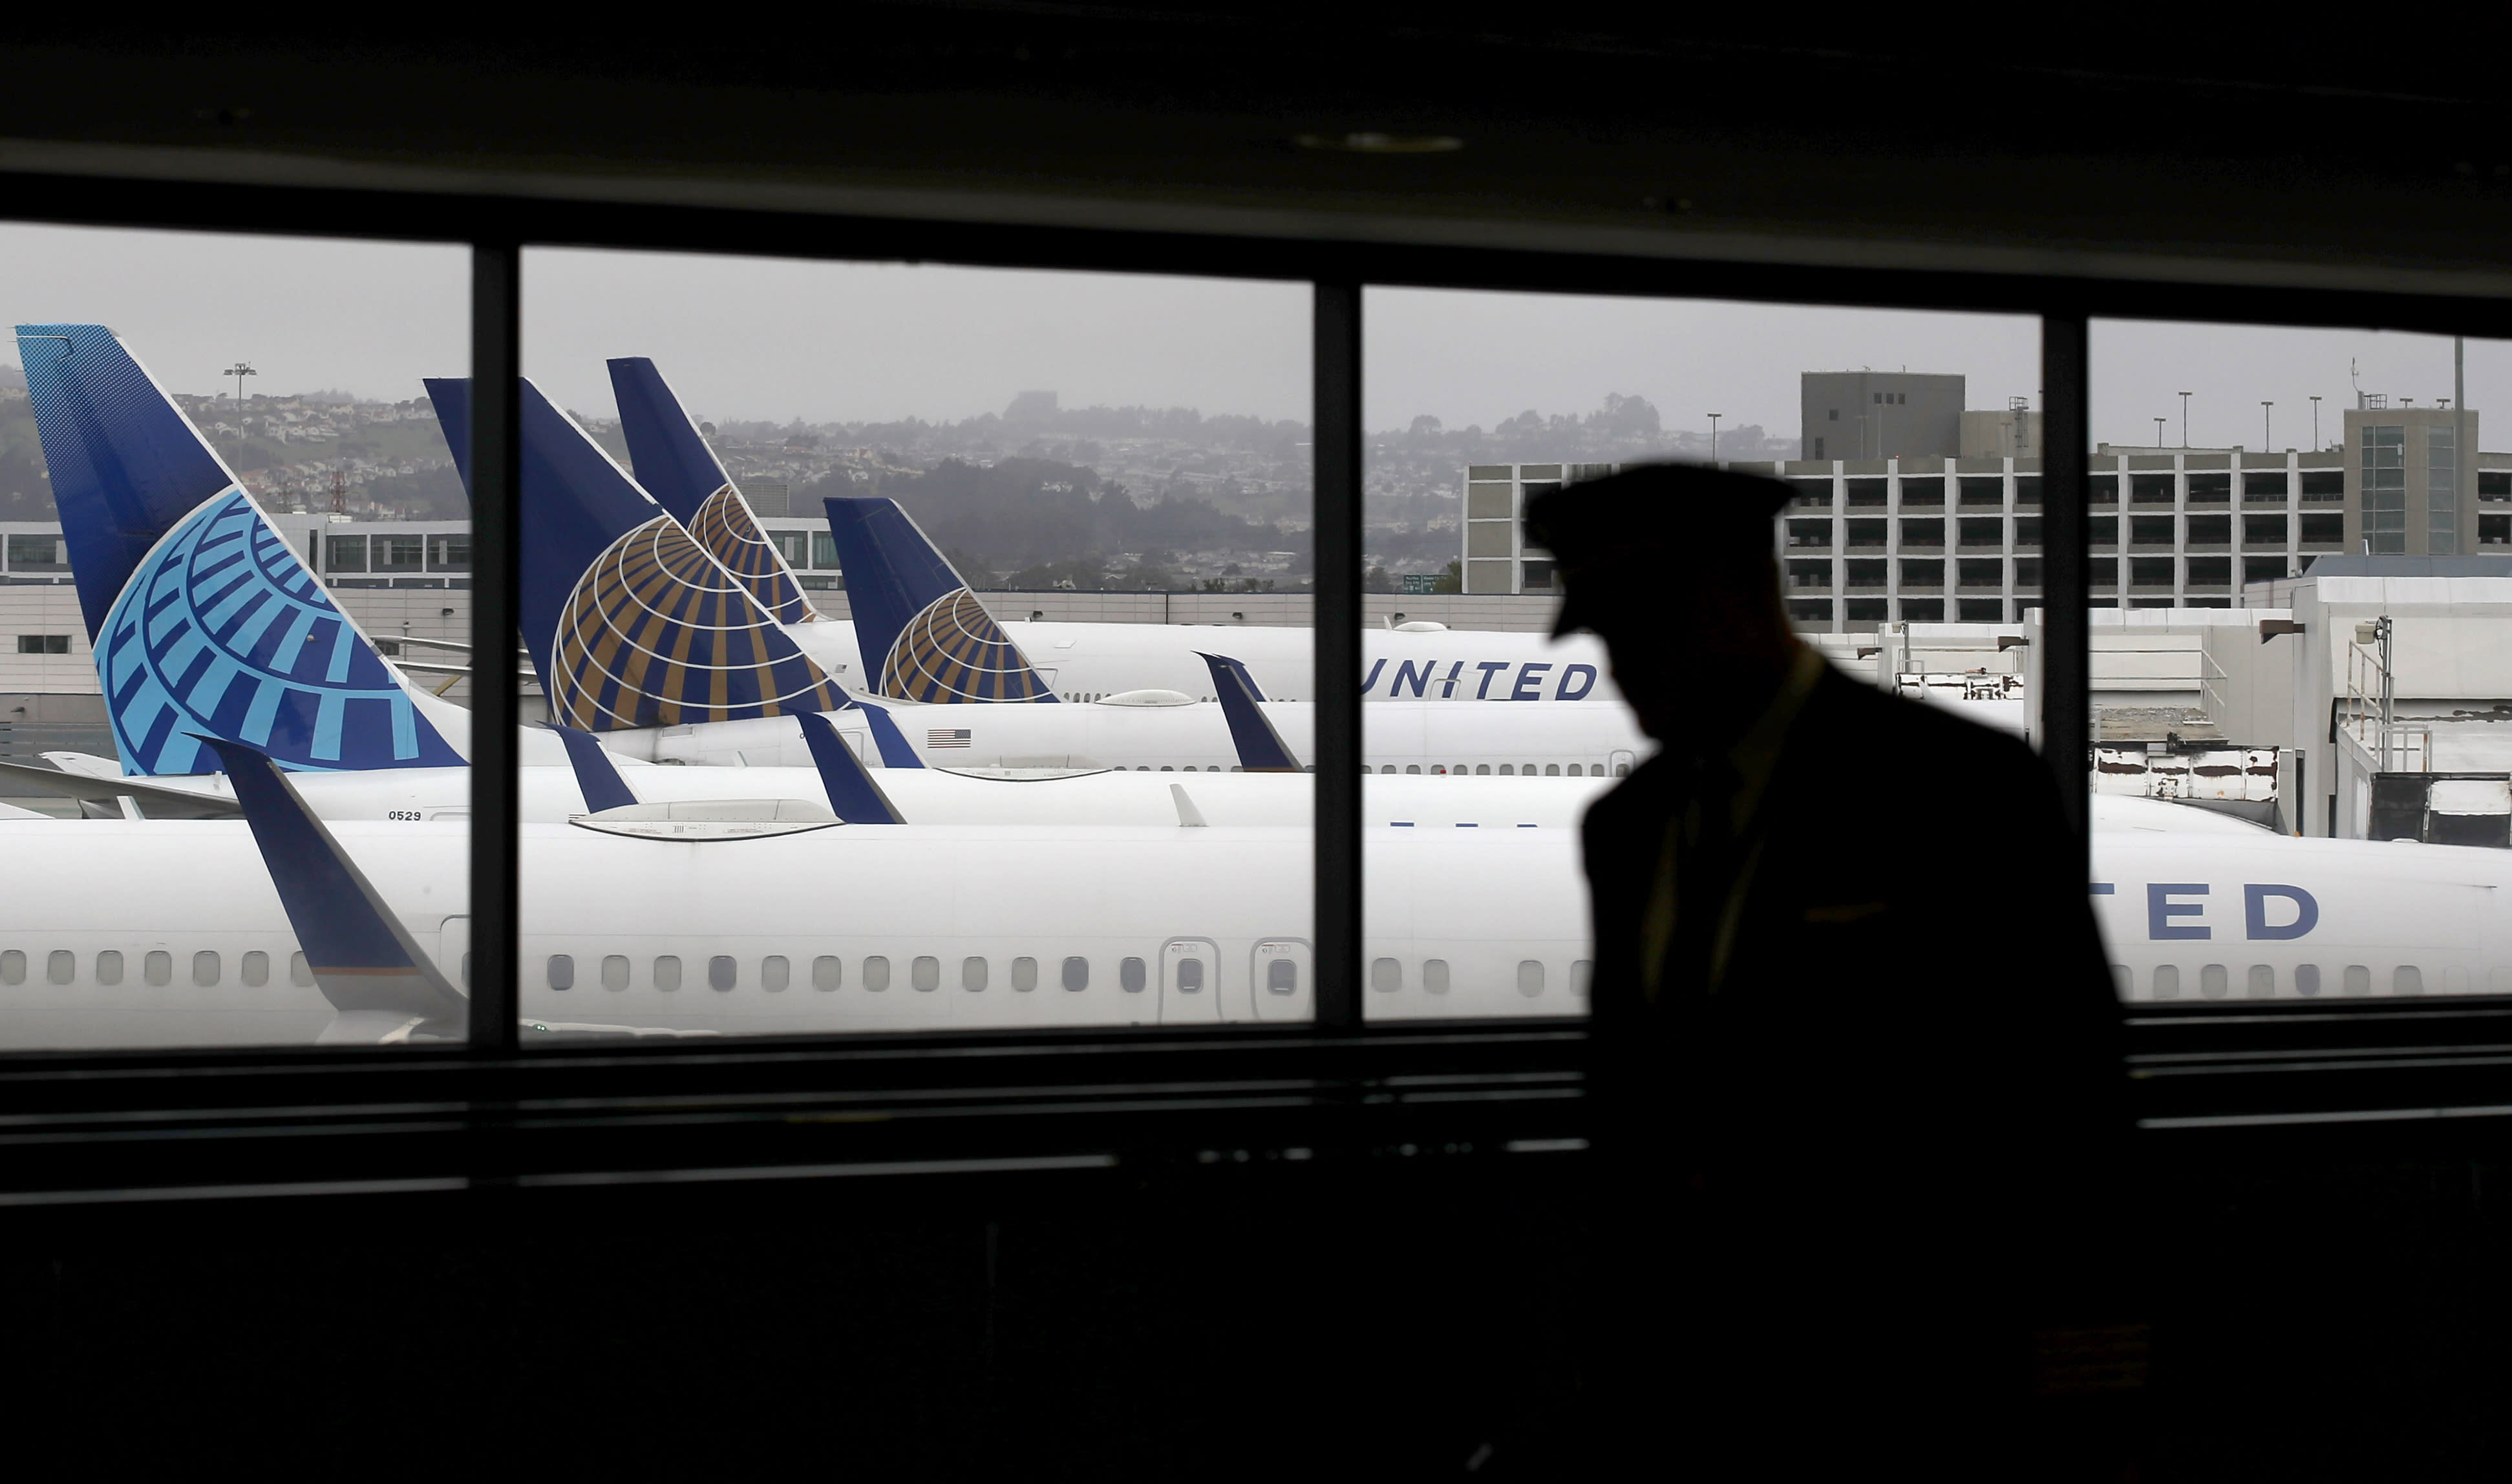 United Airlines to cut 2,850 pilot jobs without more U.S. government aid